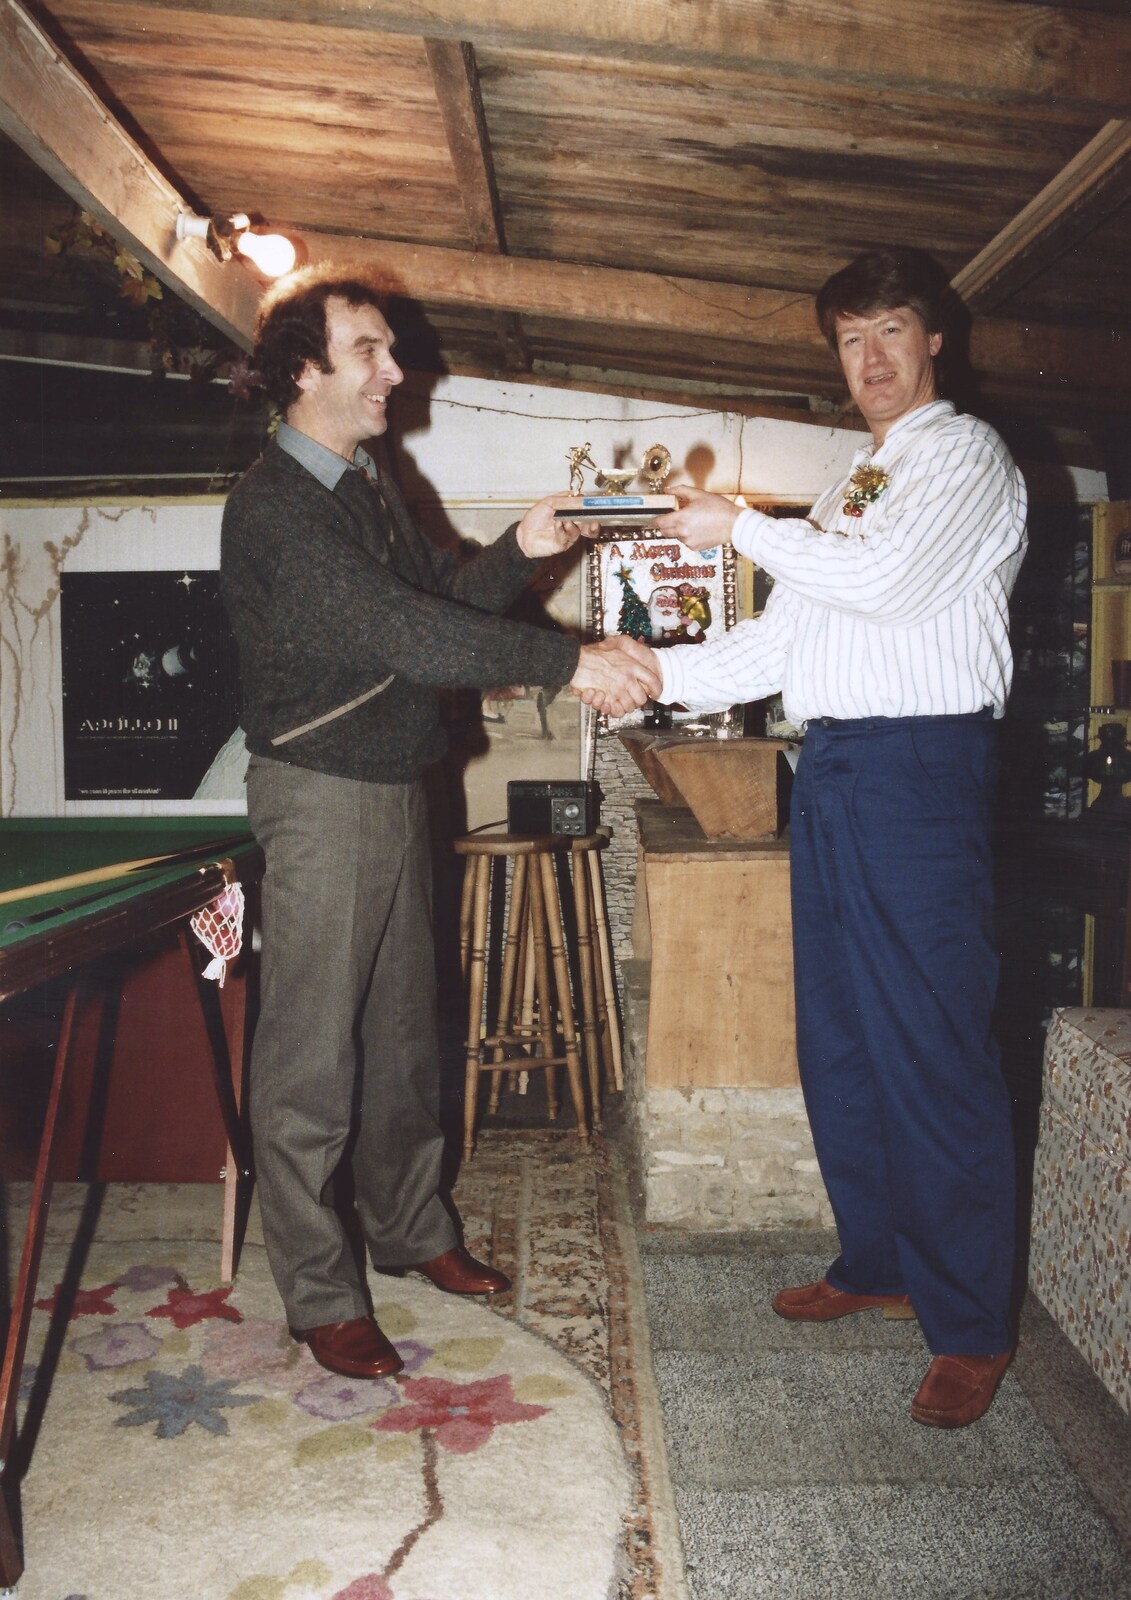 Mike presents a pool prize to Neil from Petanque At The Willows, Bransgore, Dorset - 10th July 1990